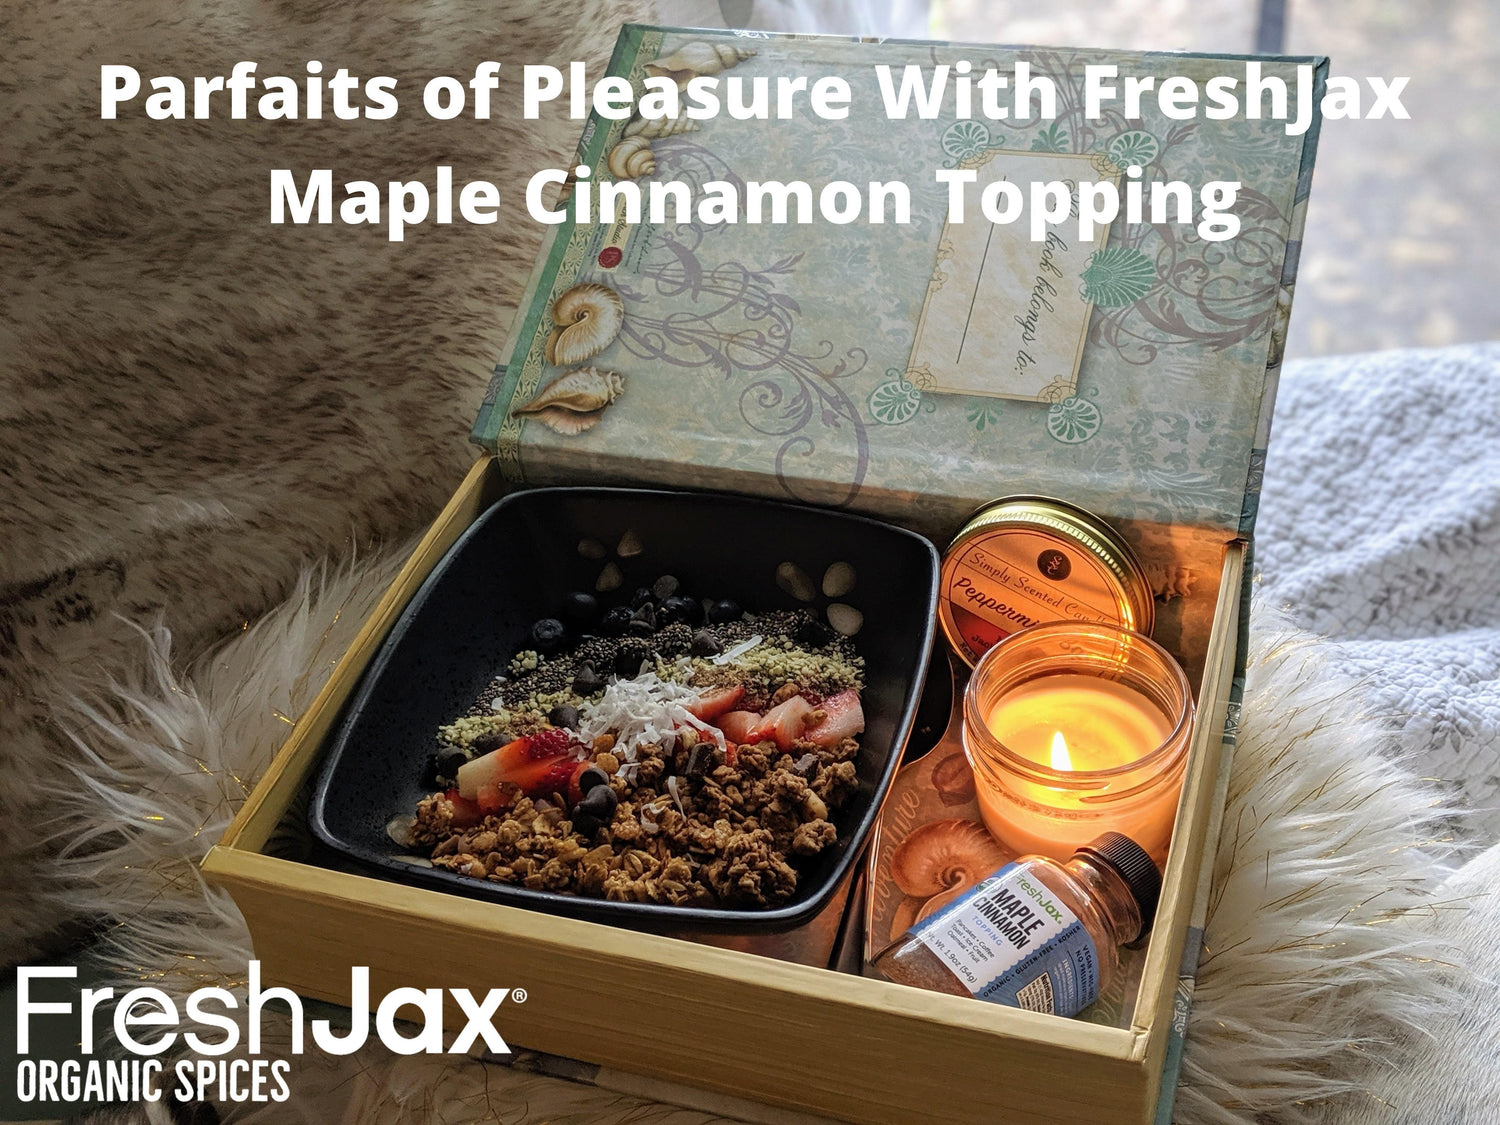 A mother's day parfaits of pleasure gift basket with a bowl of maple cinnamon parfait next to a bottle of FreshJax maple cinnamon topping and lit peppermint bark candle.